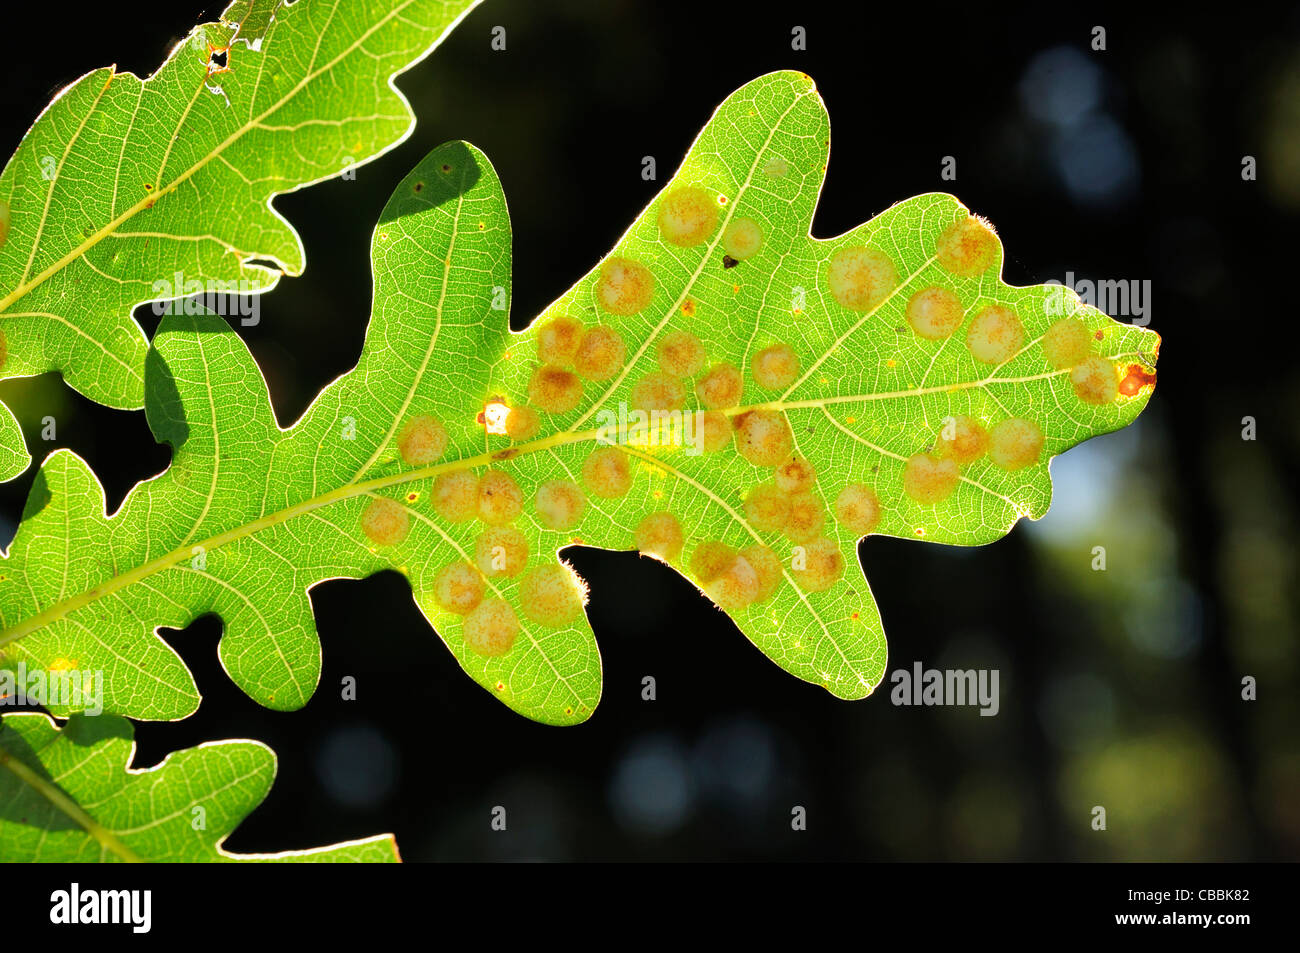 The spangle galls of the wasp Neuroterus quercusbaccarum under an oak leaf. Stock Photo